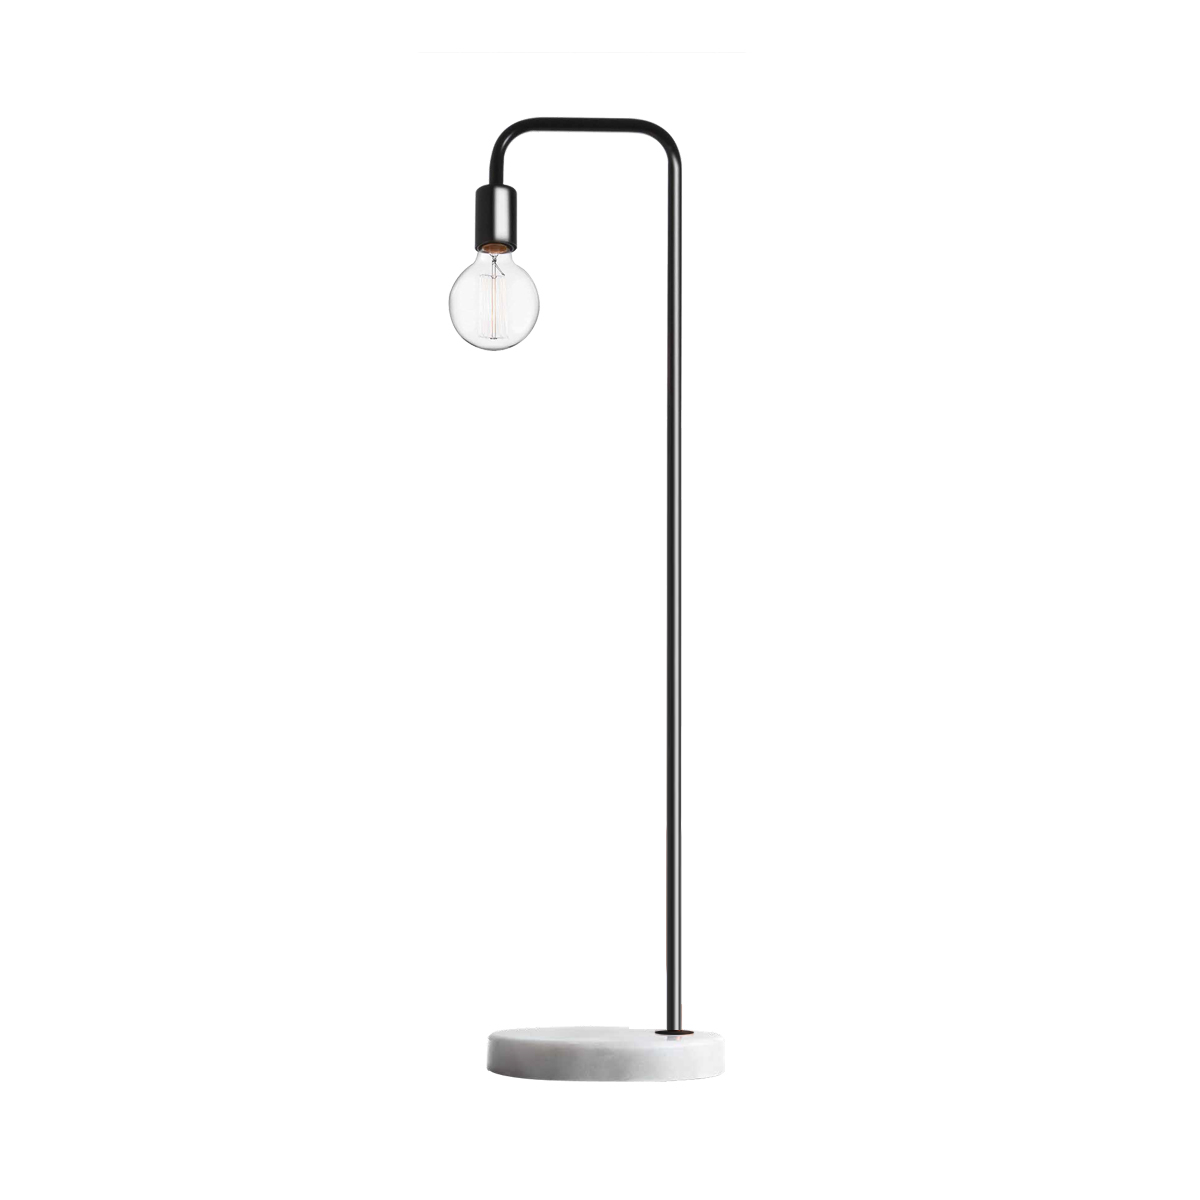 Marmo Floor Lamp Kmart Kmart Lamps Upright Cabtivist intended for proportions 1200 X 1200